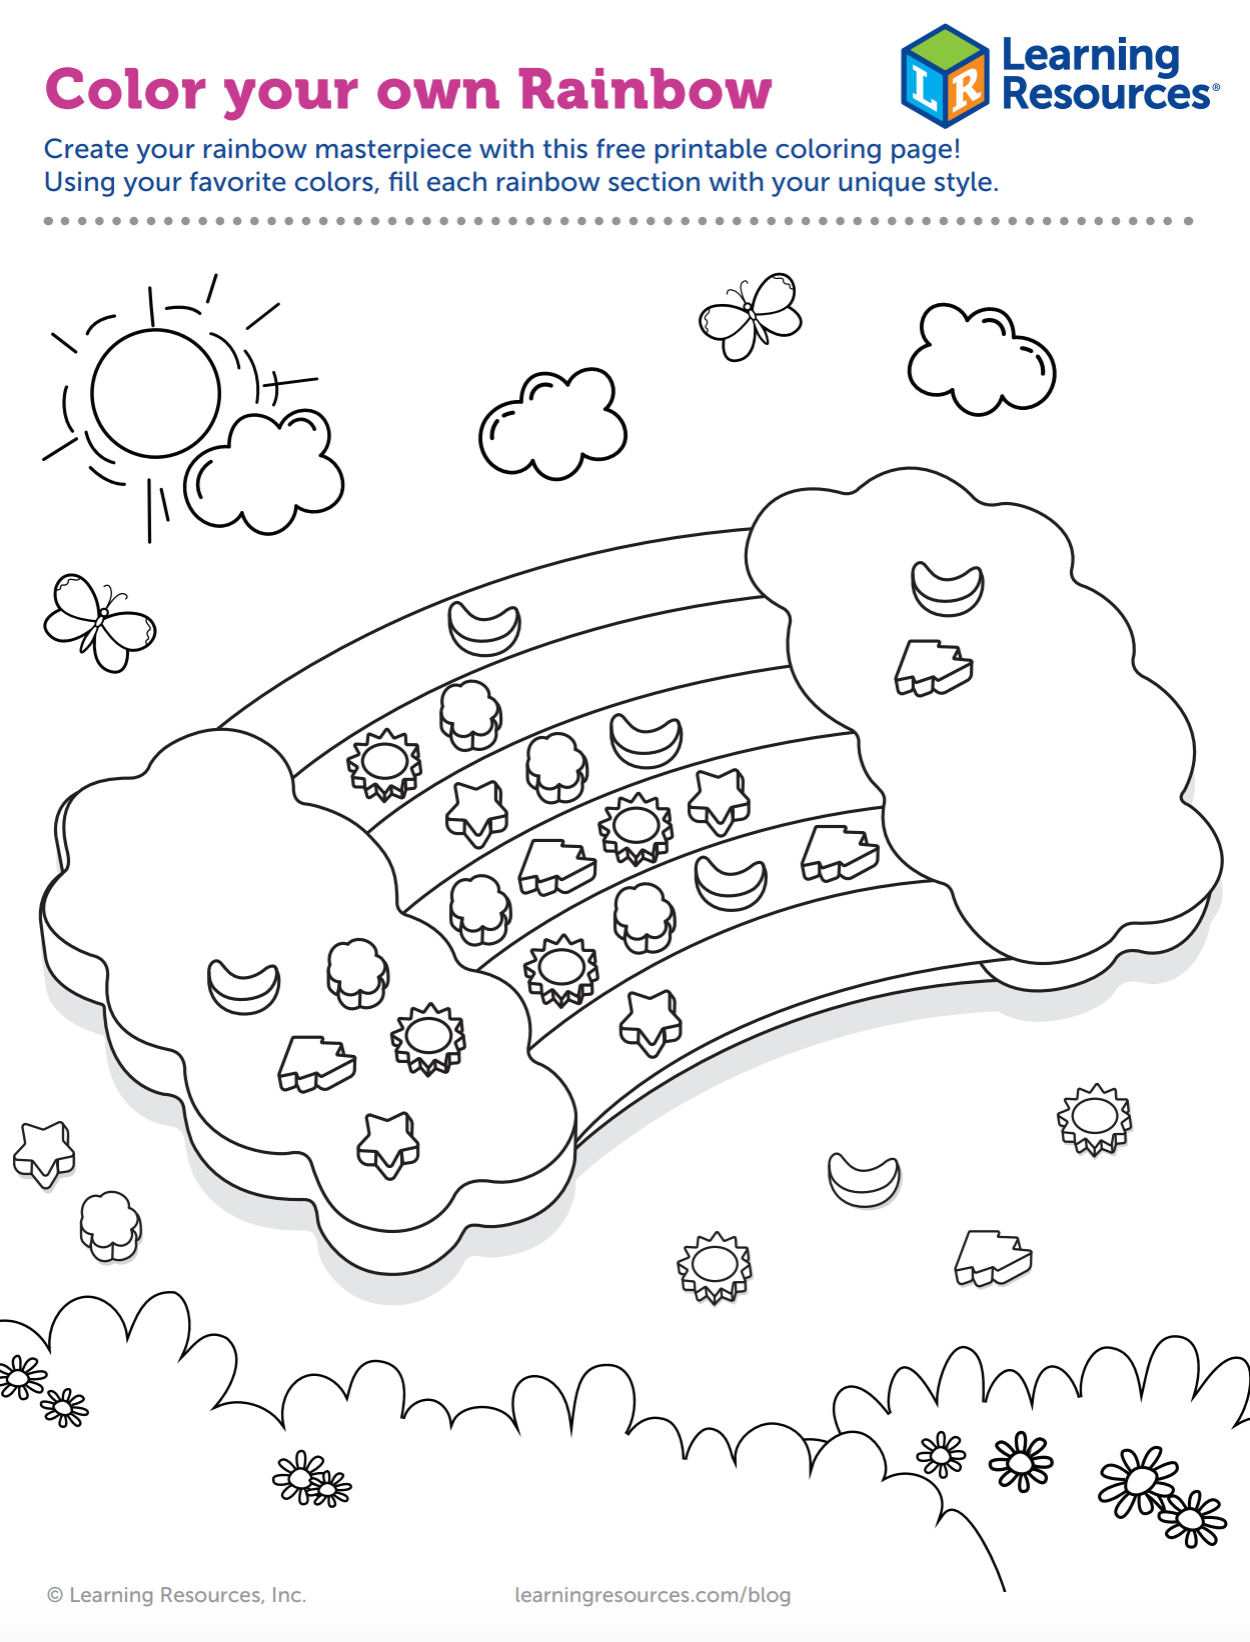 Unleash your childs creativity with learning resources color your own rainbow printable